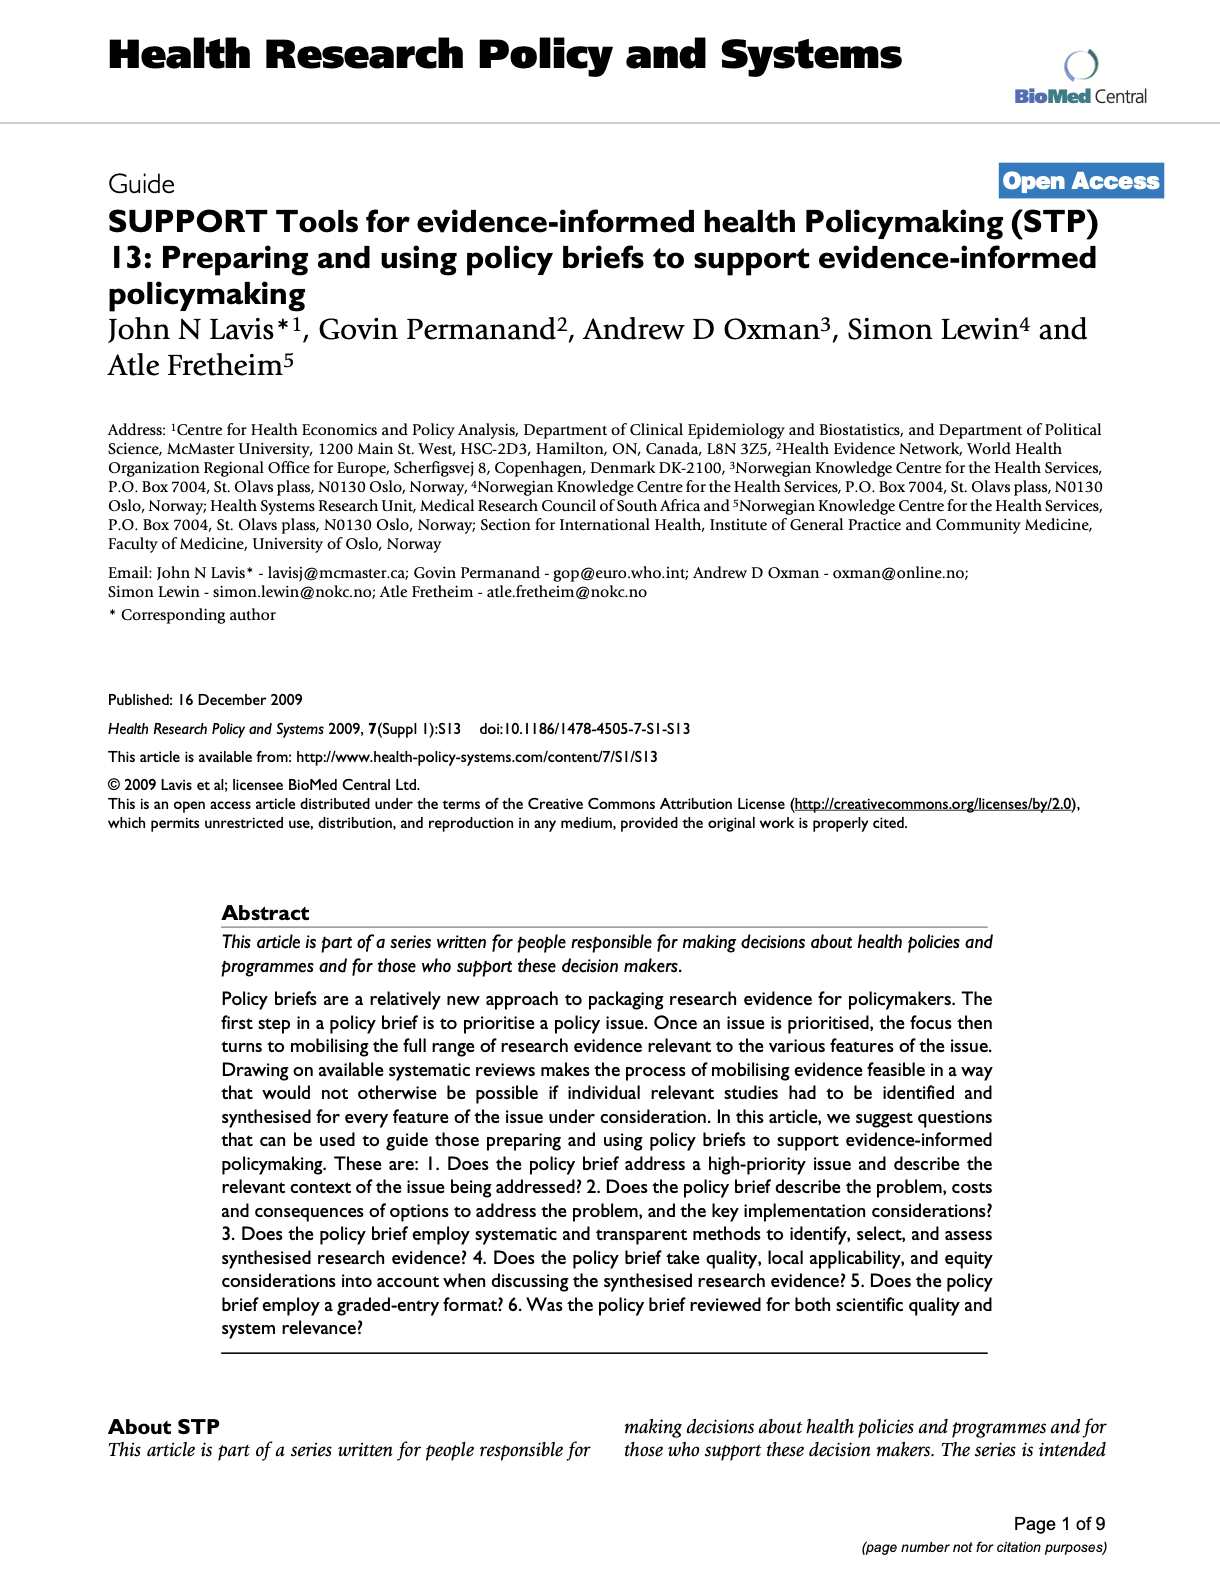 SUPPORT Tools for Evidence-Informed Health Policymaking (STP) 13: Preparing and Using Policy Briefs to Support Evidence-Informed Policymaking